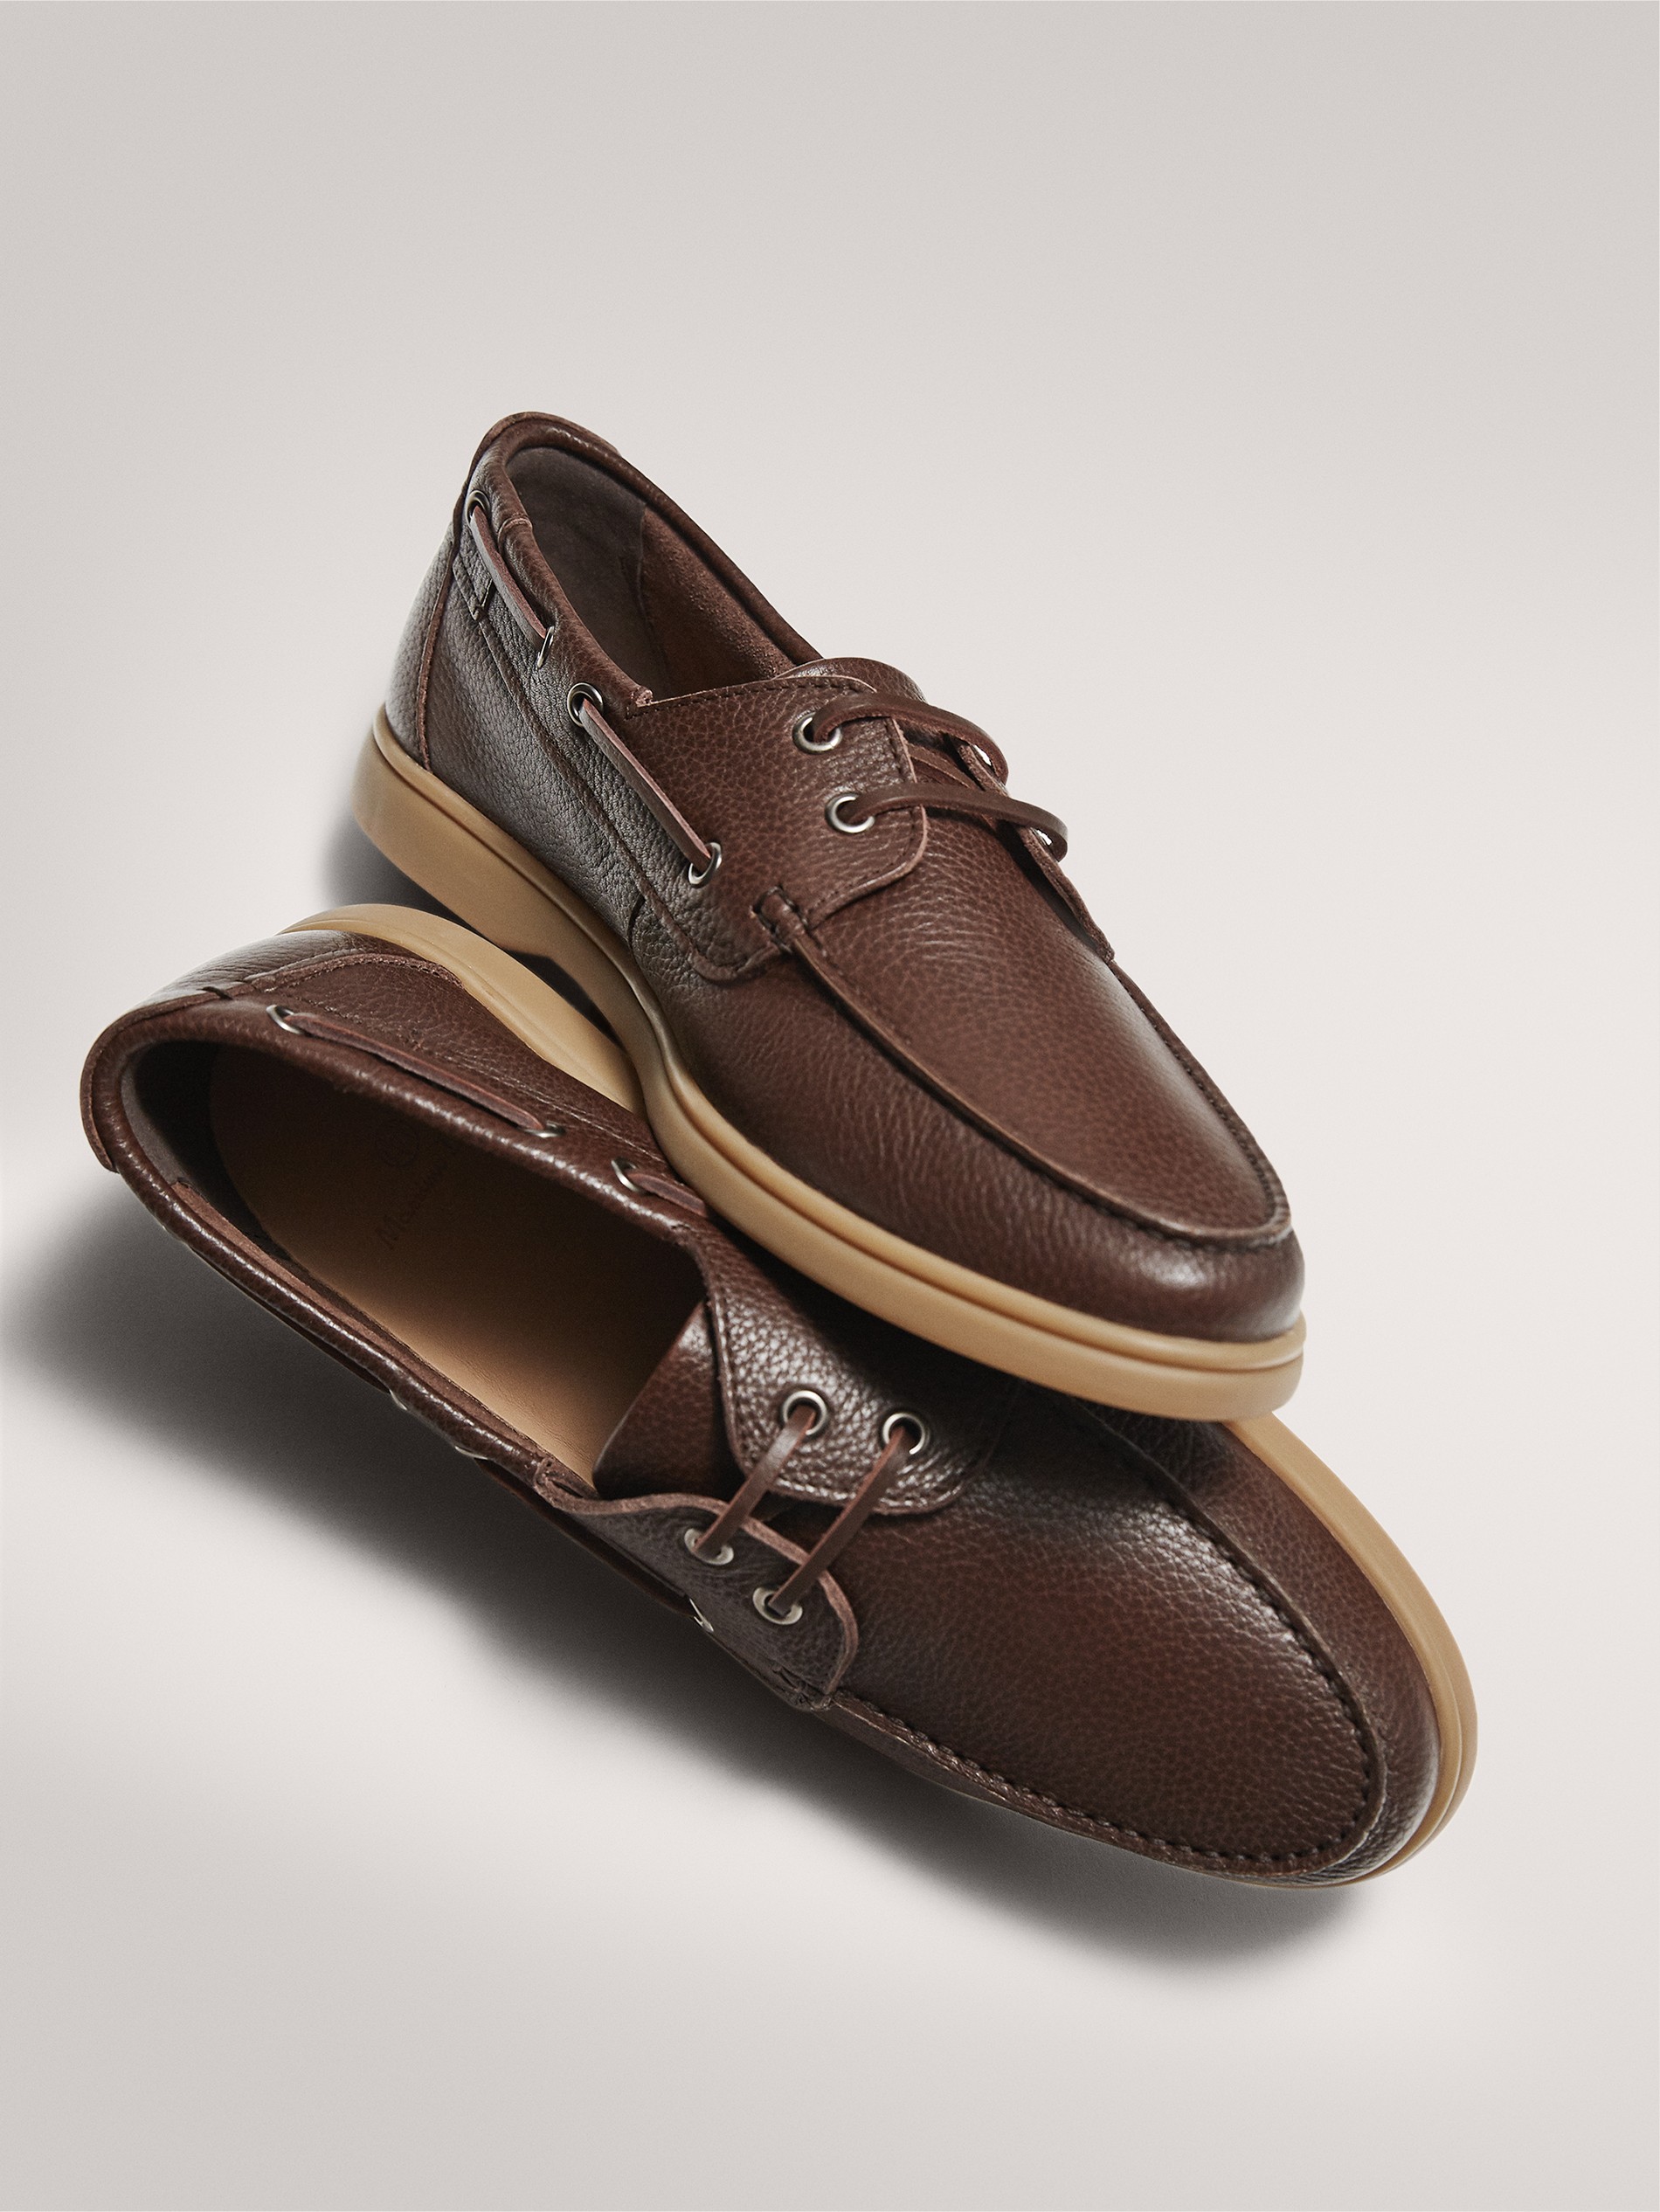 soft leather boat shoes